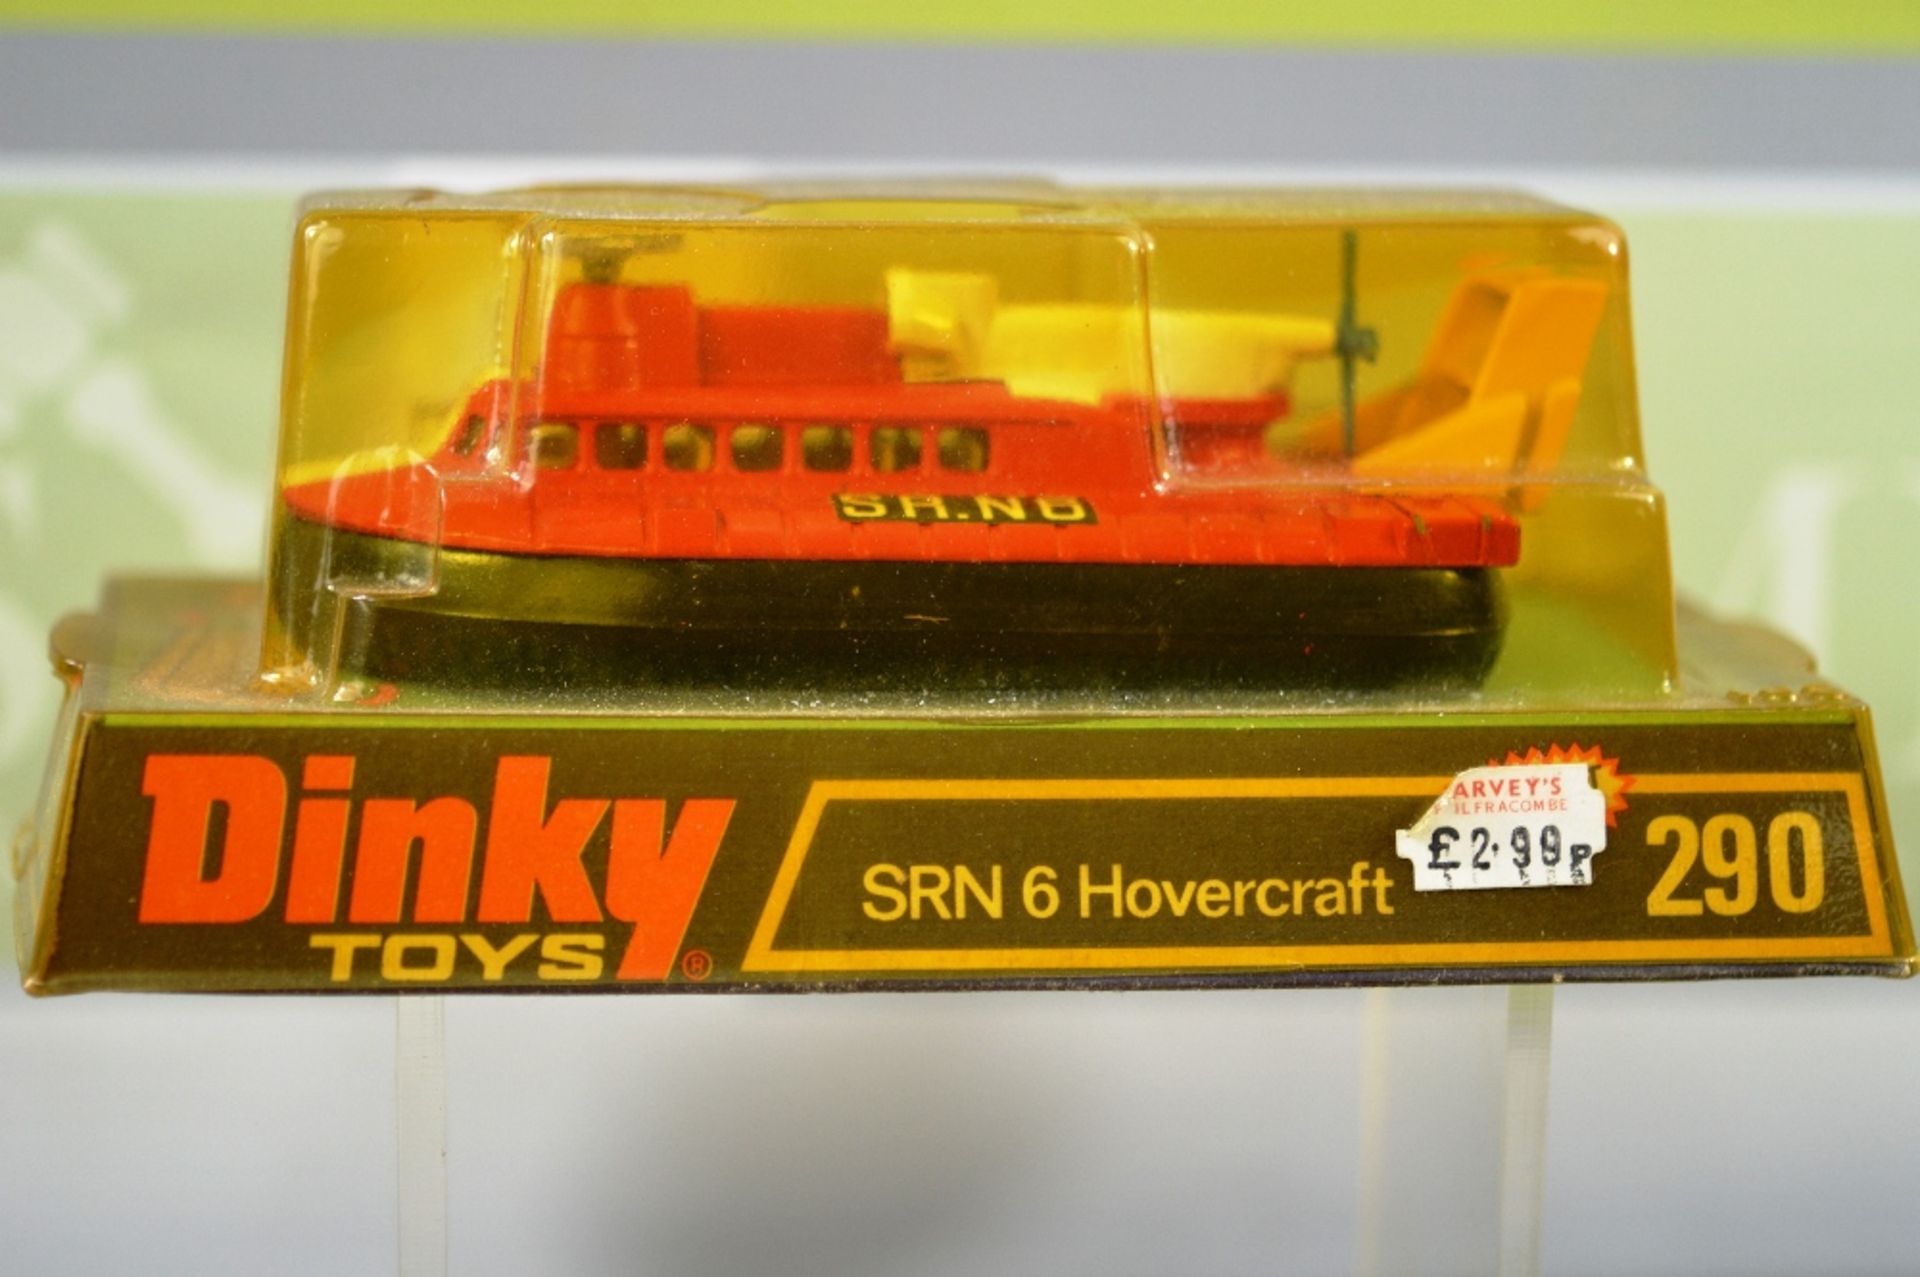 Dinky Toys 290 SRN 6 Hovercraft  in original packaging from private collector for 30 years - Image 2 of 3